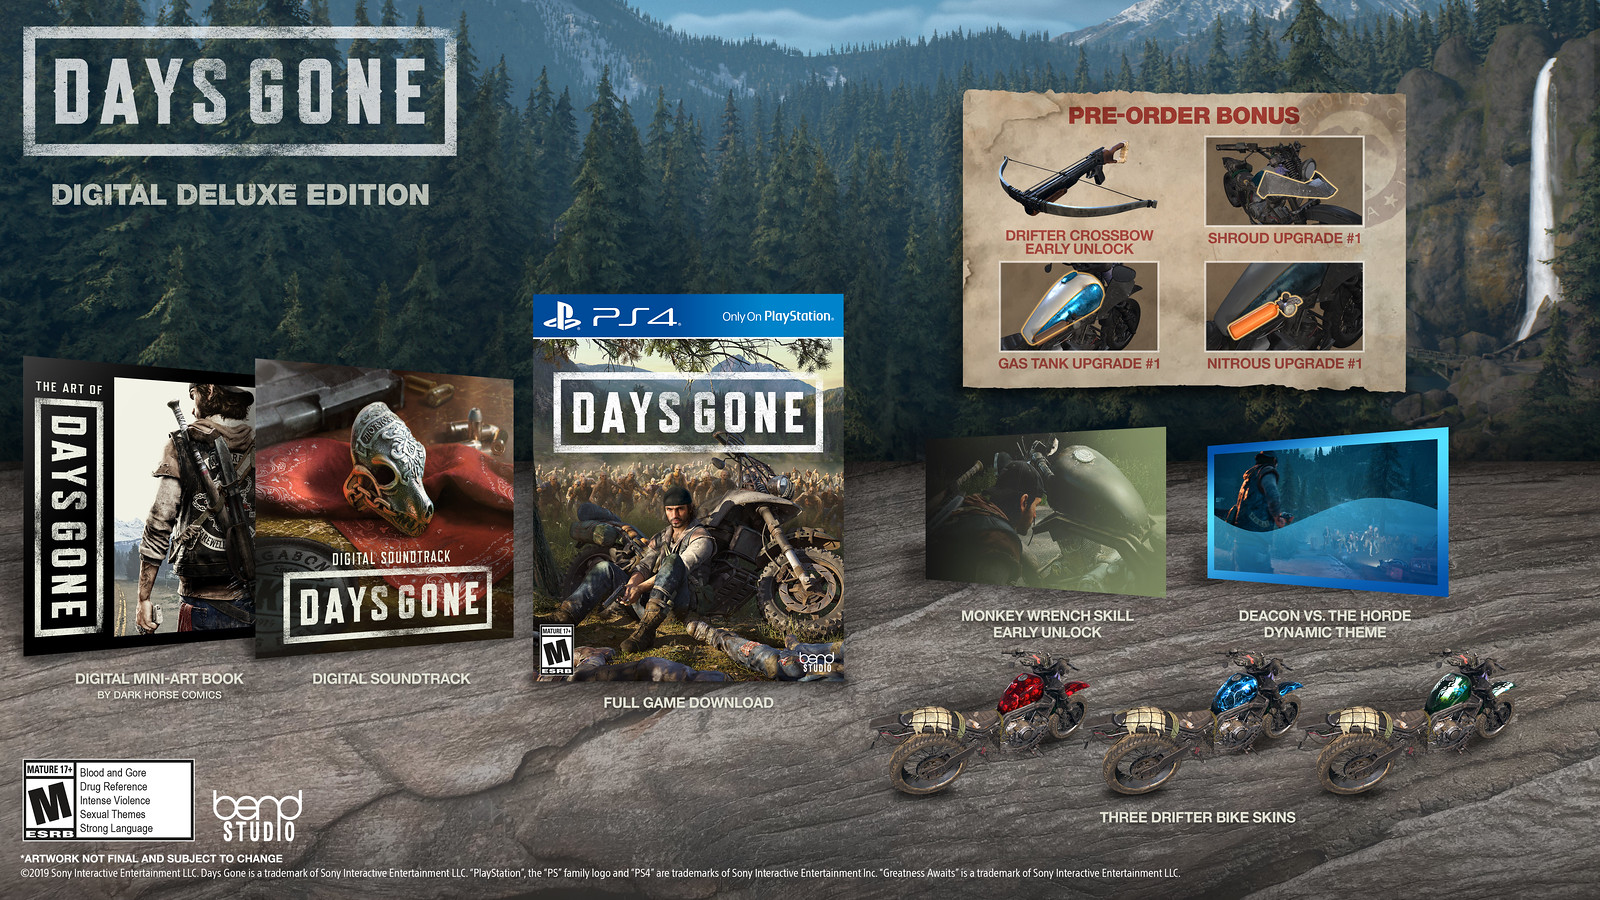 Days Gone - Digital Deluxe Edition